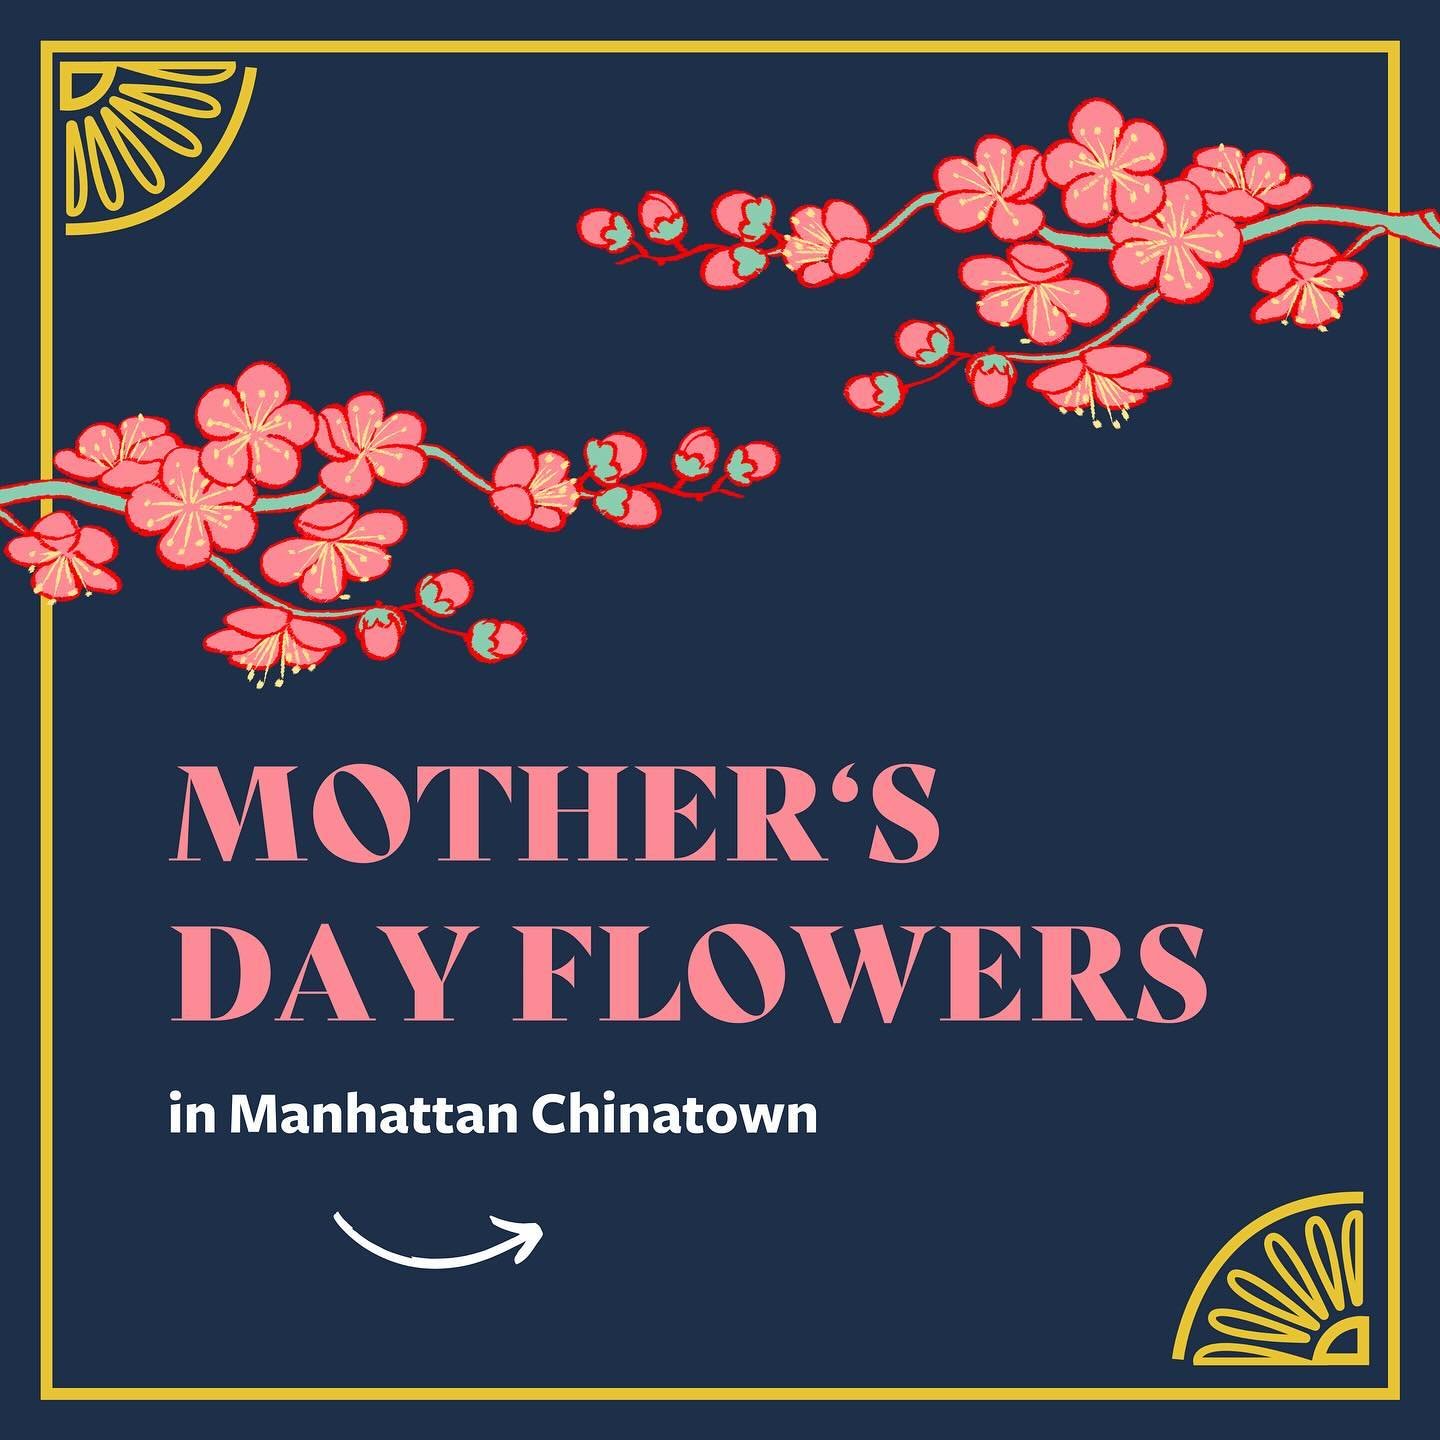 Mother&rsquo;s Day is in 3 days&hellip;which means it&rsquo;s time to bring the special person in your life a beautiful bouquet of flowers! 🌸💐

Use our guide above to browse local florists in Chinatown! If you don&rsquo;t have time to stop by in pe